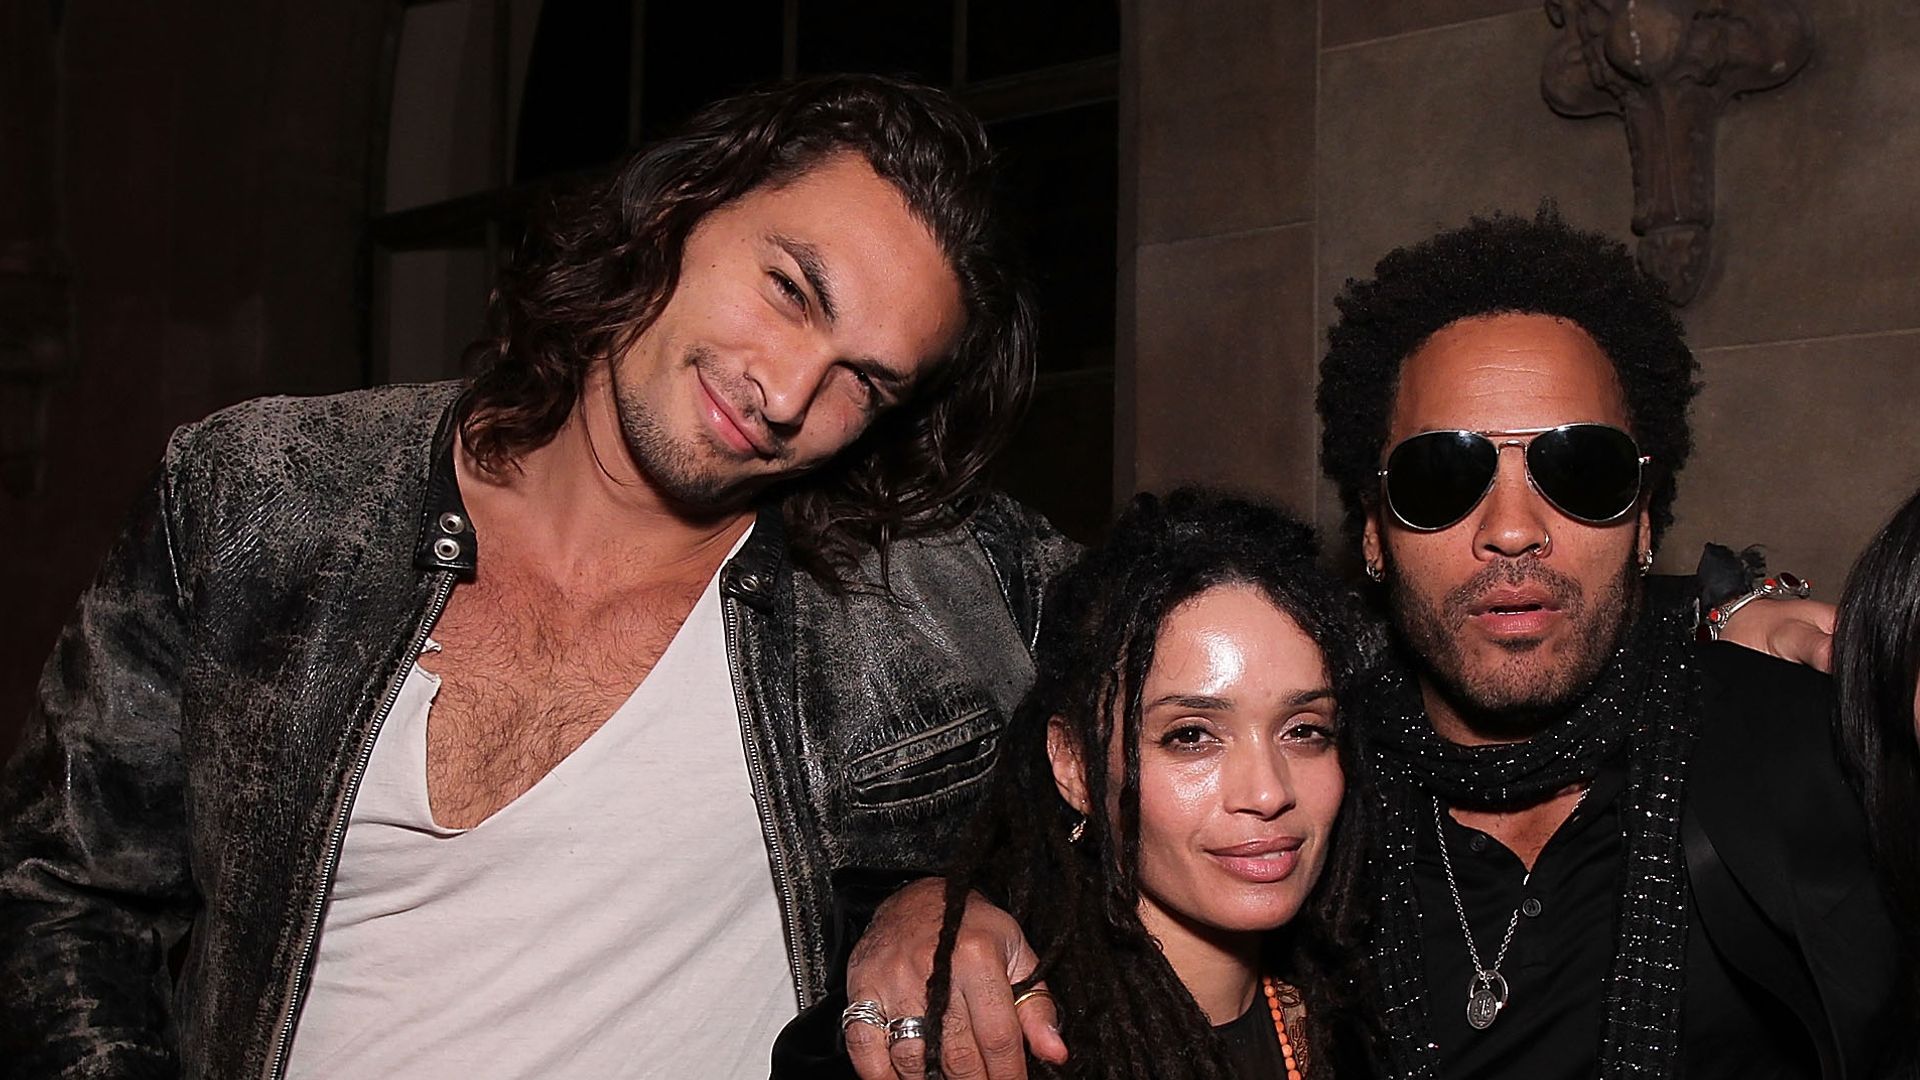 Jason Momoa, Lisa Bonet, Lenny Kravitz and Zoe Kravitz  at Entertainment Weekly's Party to  Celebrate the Best Director Oscar Nominees held at Chateau Marmont on February 25, 2010 in Los Angeles, California.